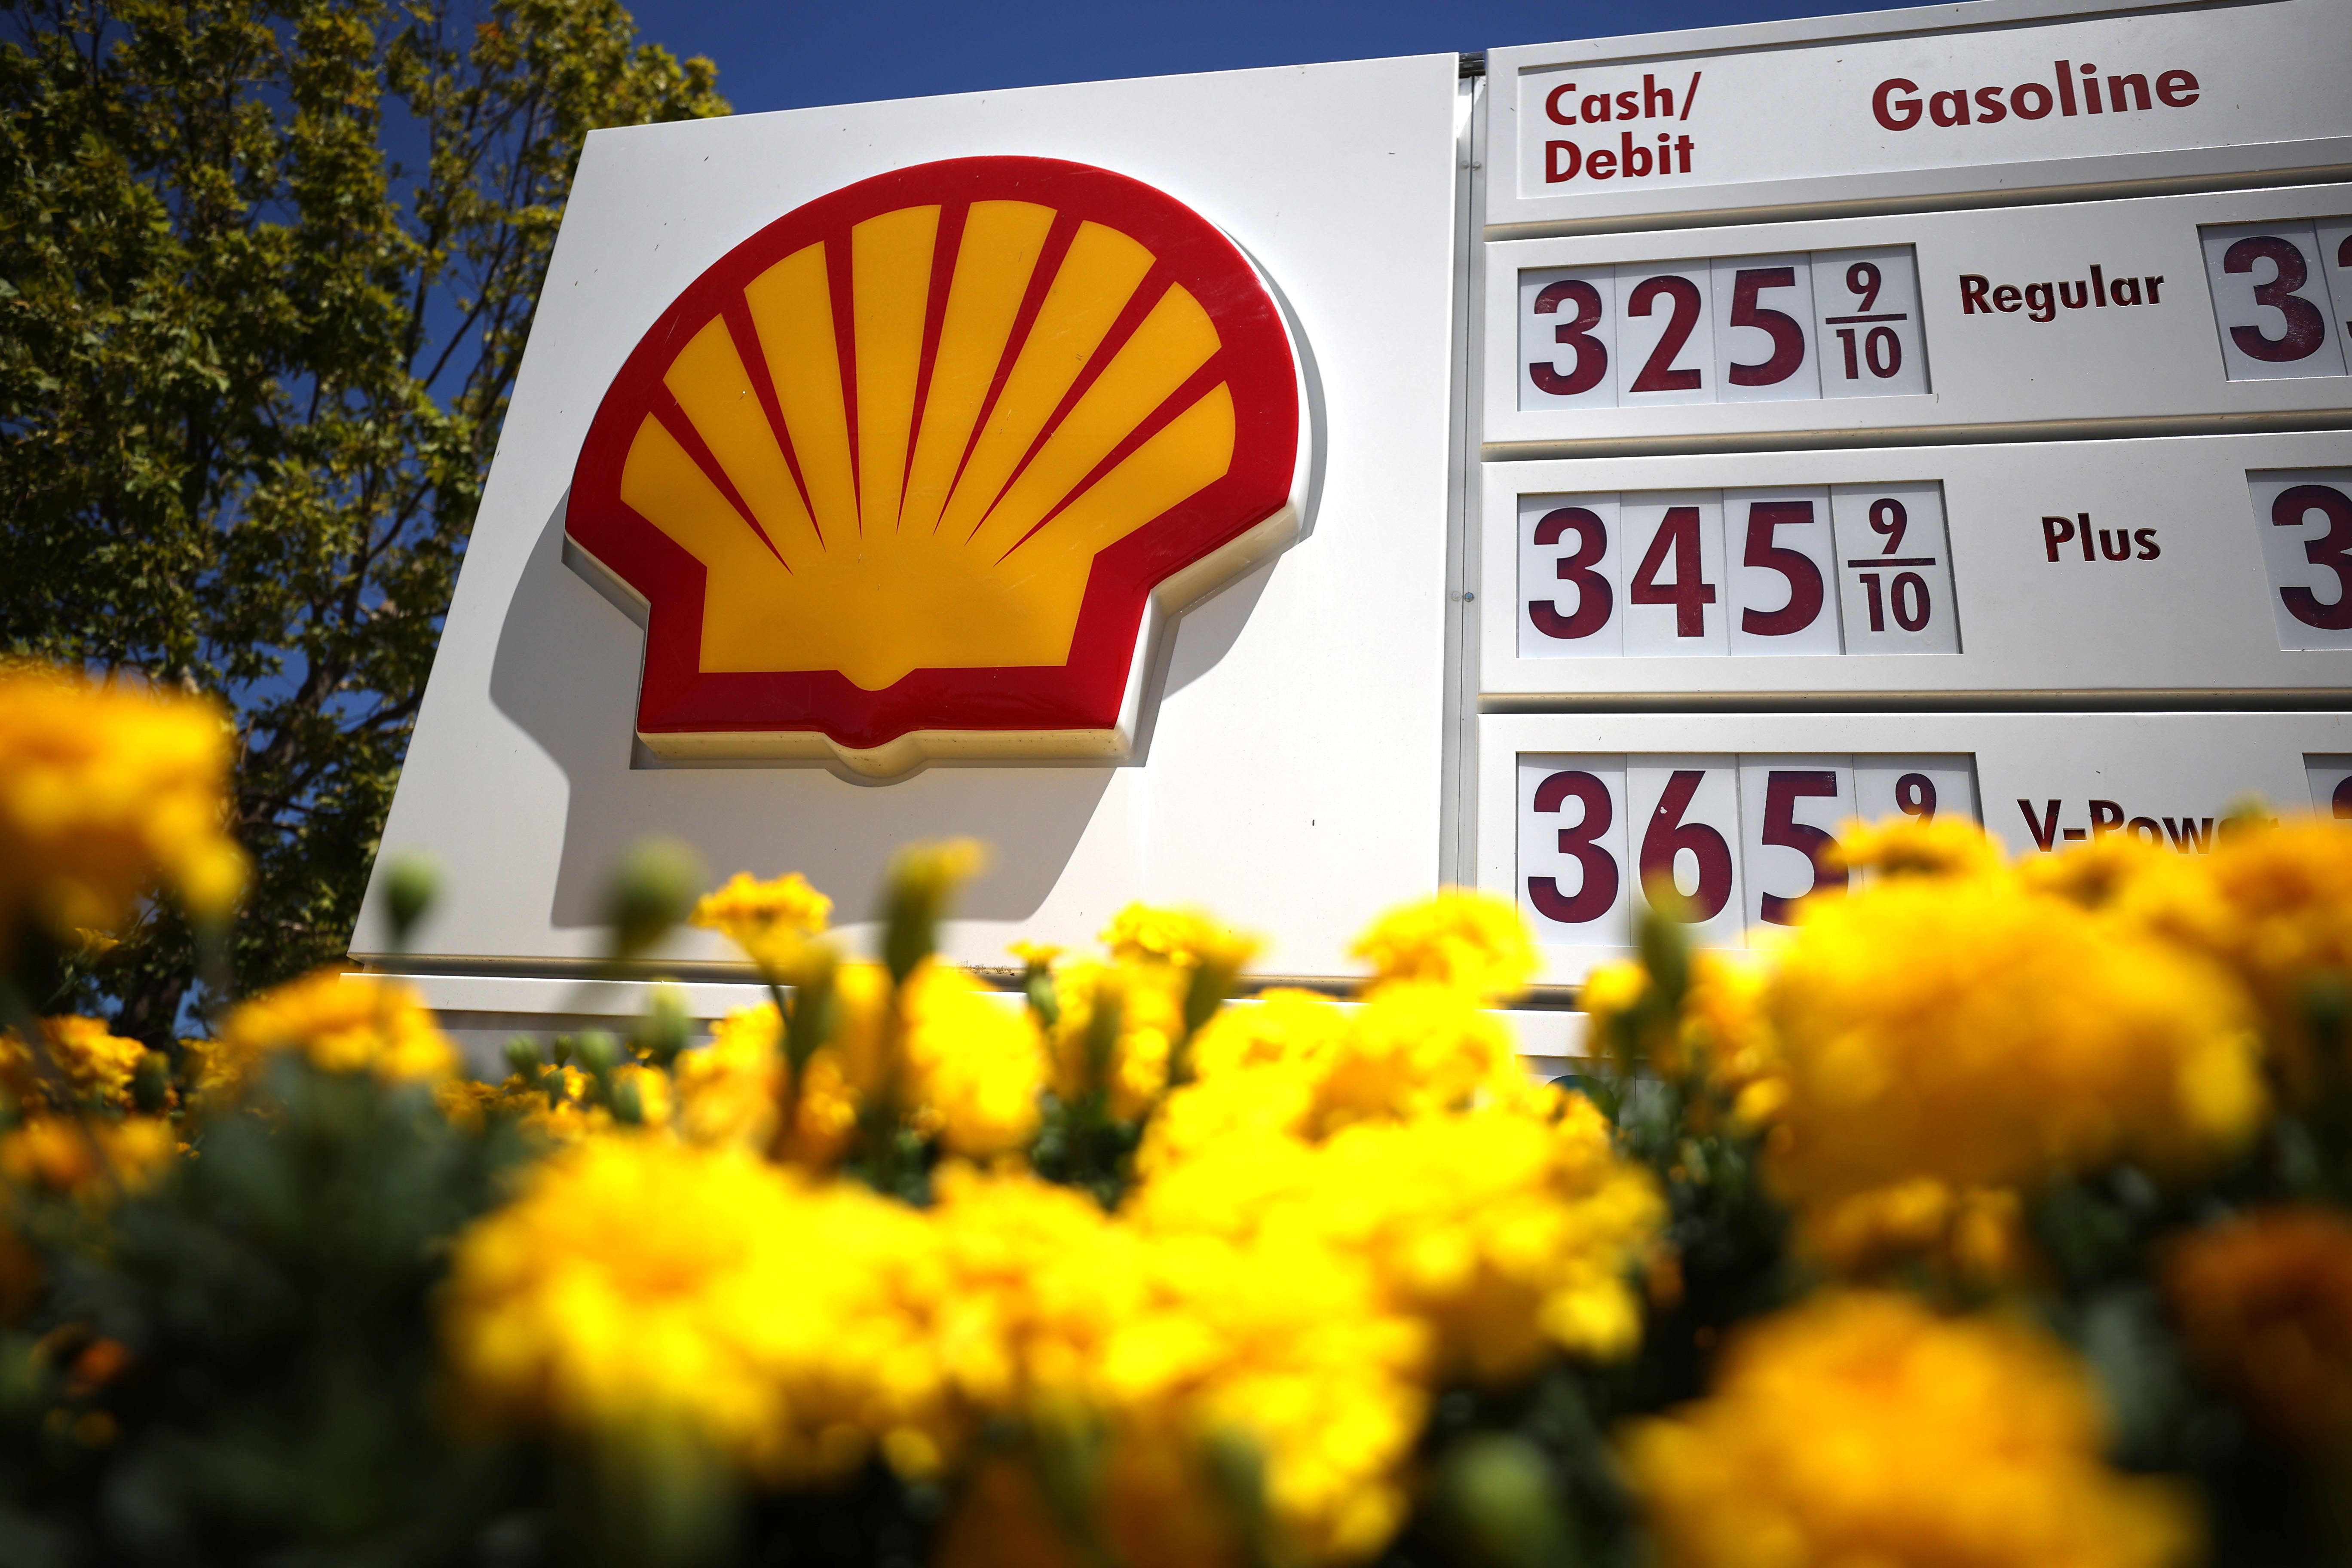 Shell to stop all Russian oil and gas purchases apologizes for buying shipment after Ukraine invasion – CNBC